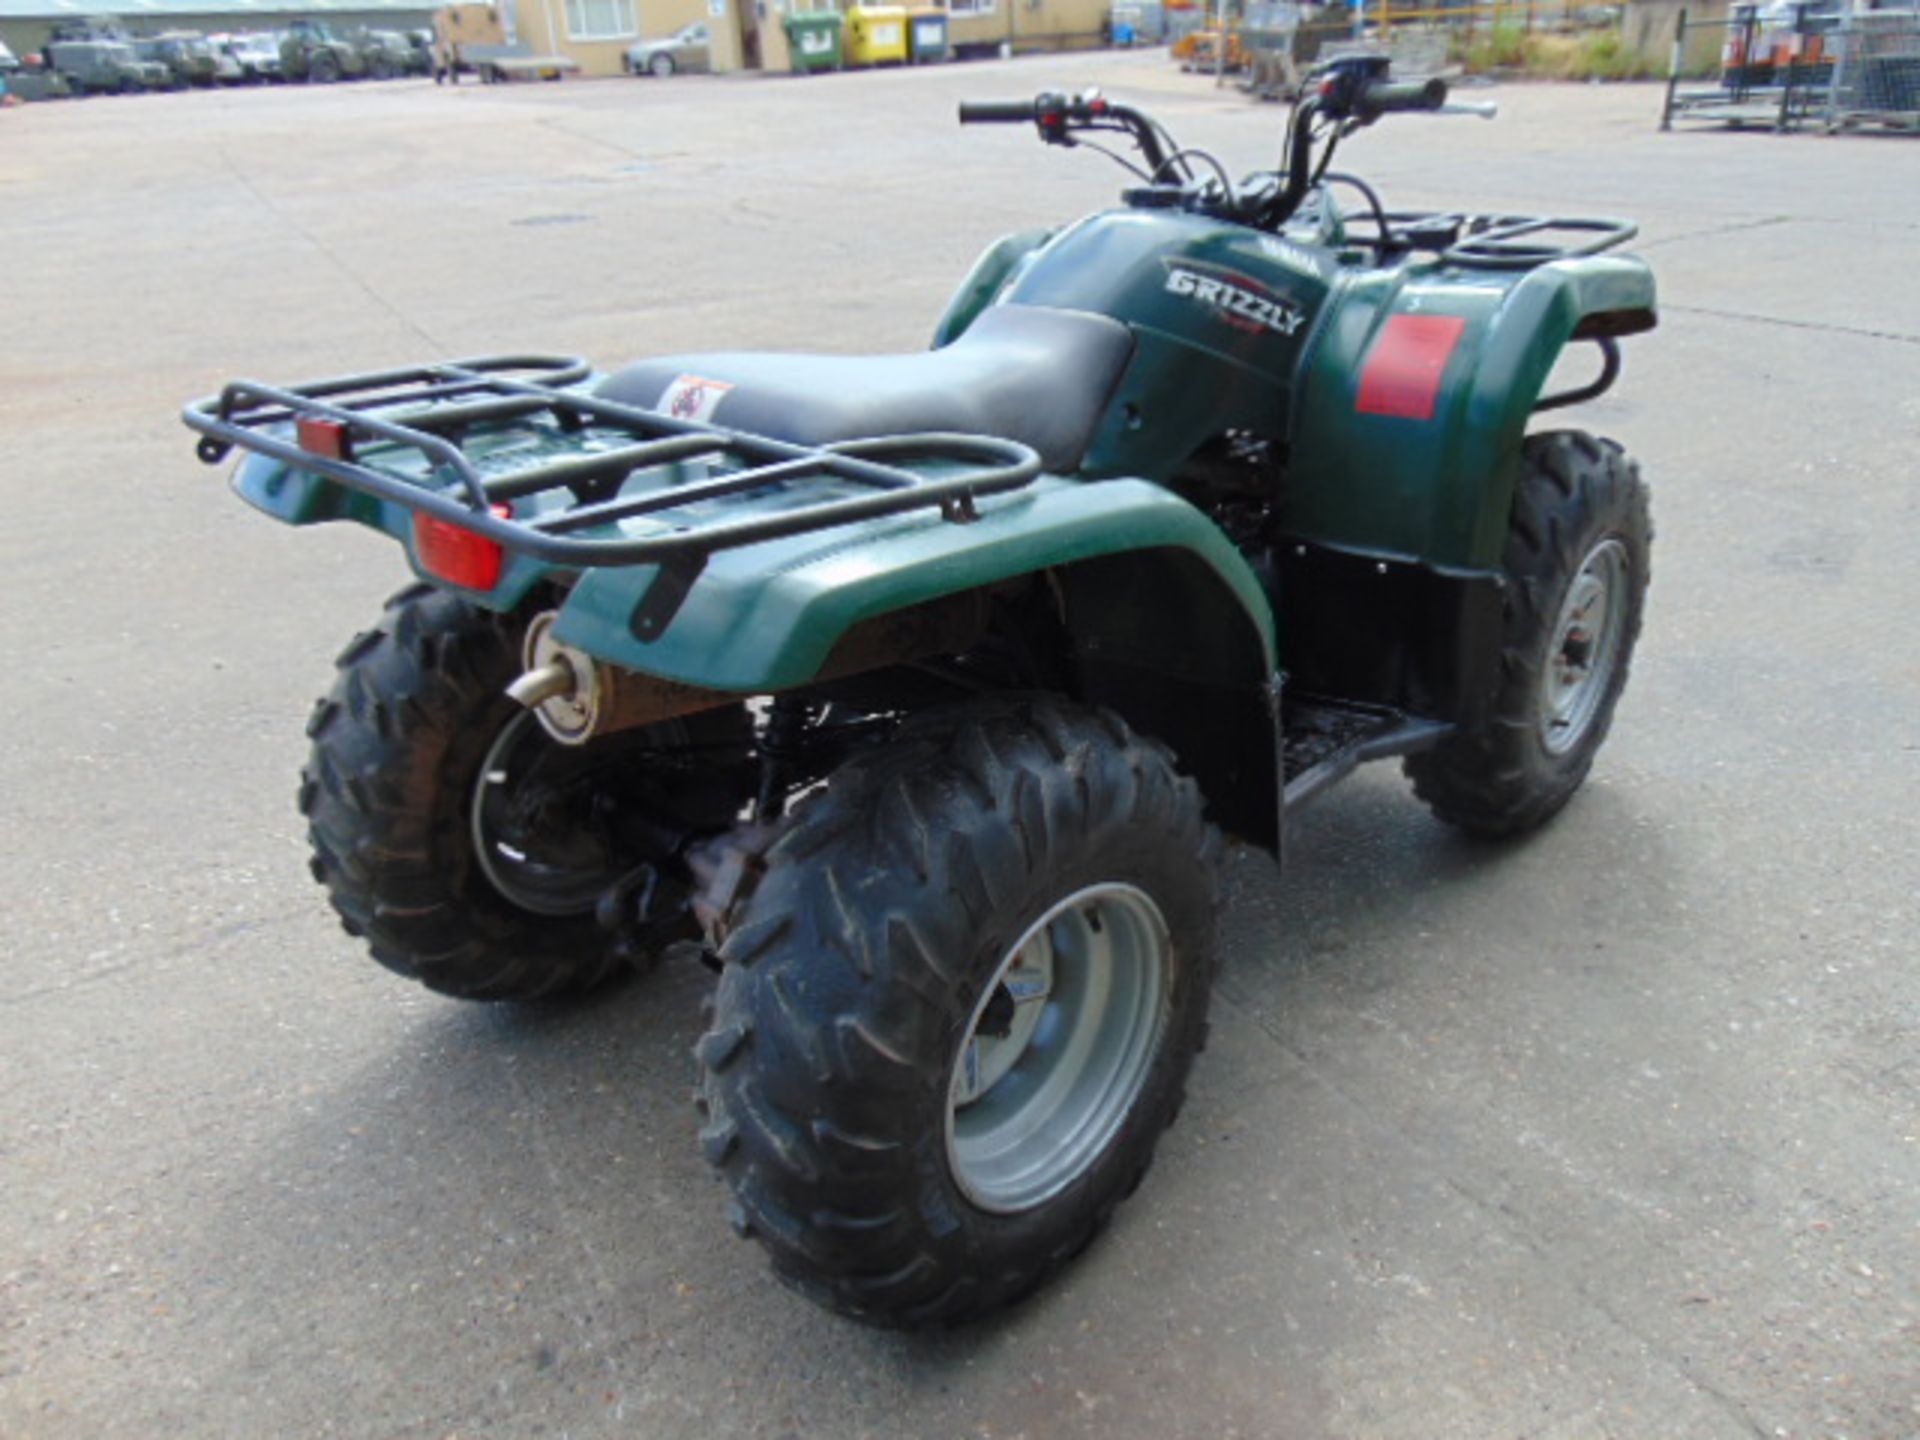 2007 Yamaha Grizzly 350 Ultramatic 4 x 4 ATV Quad Bike ONLY 1,572KM! - Image 8 of 24